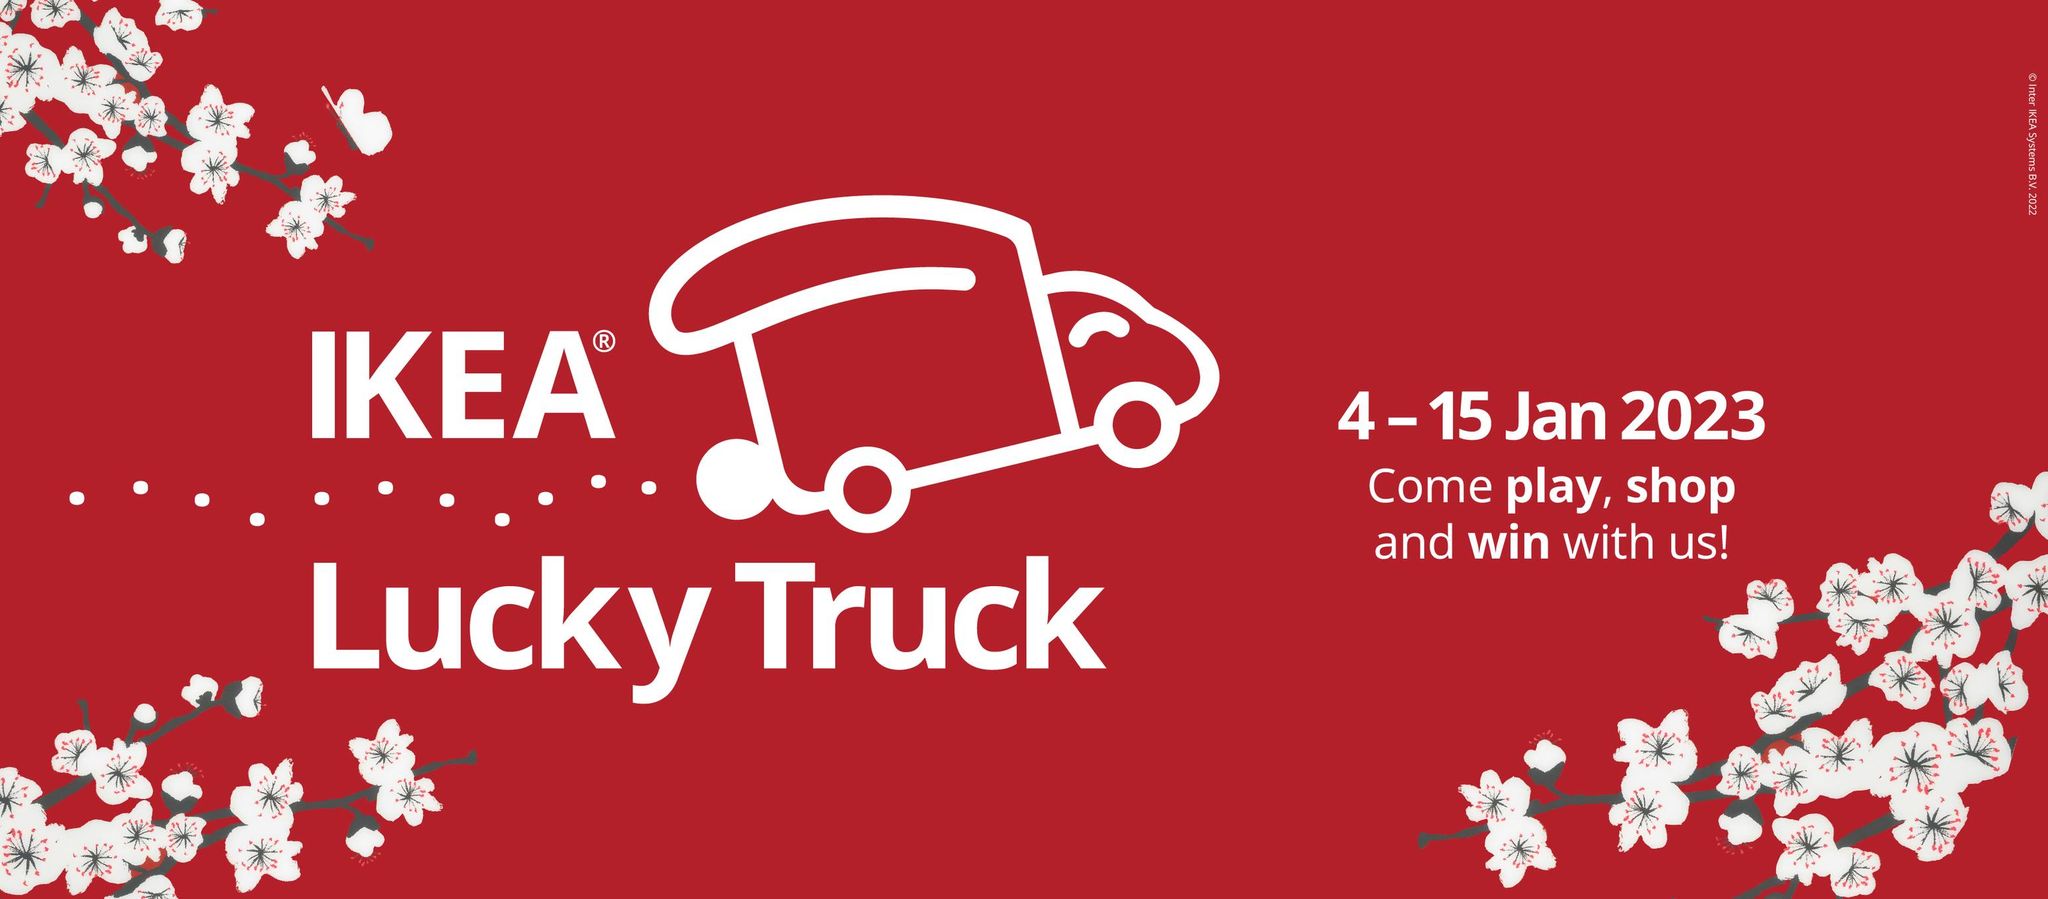 Ikea lucky truck - Chinese new year sale and promotion